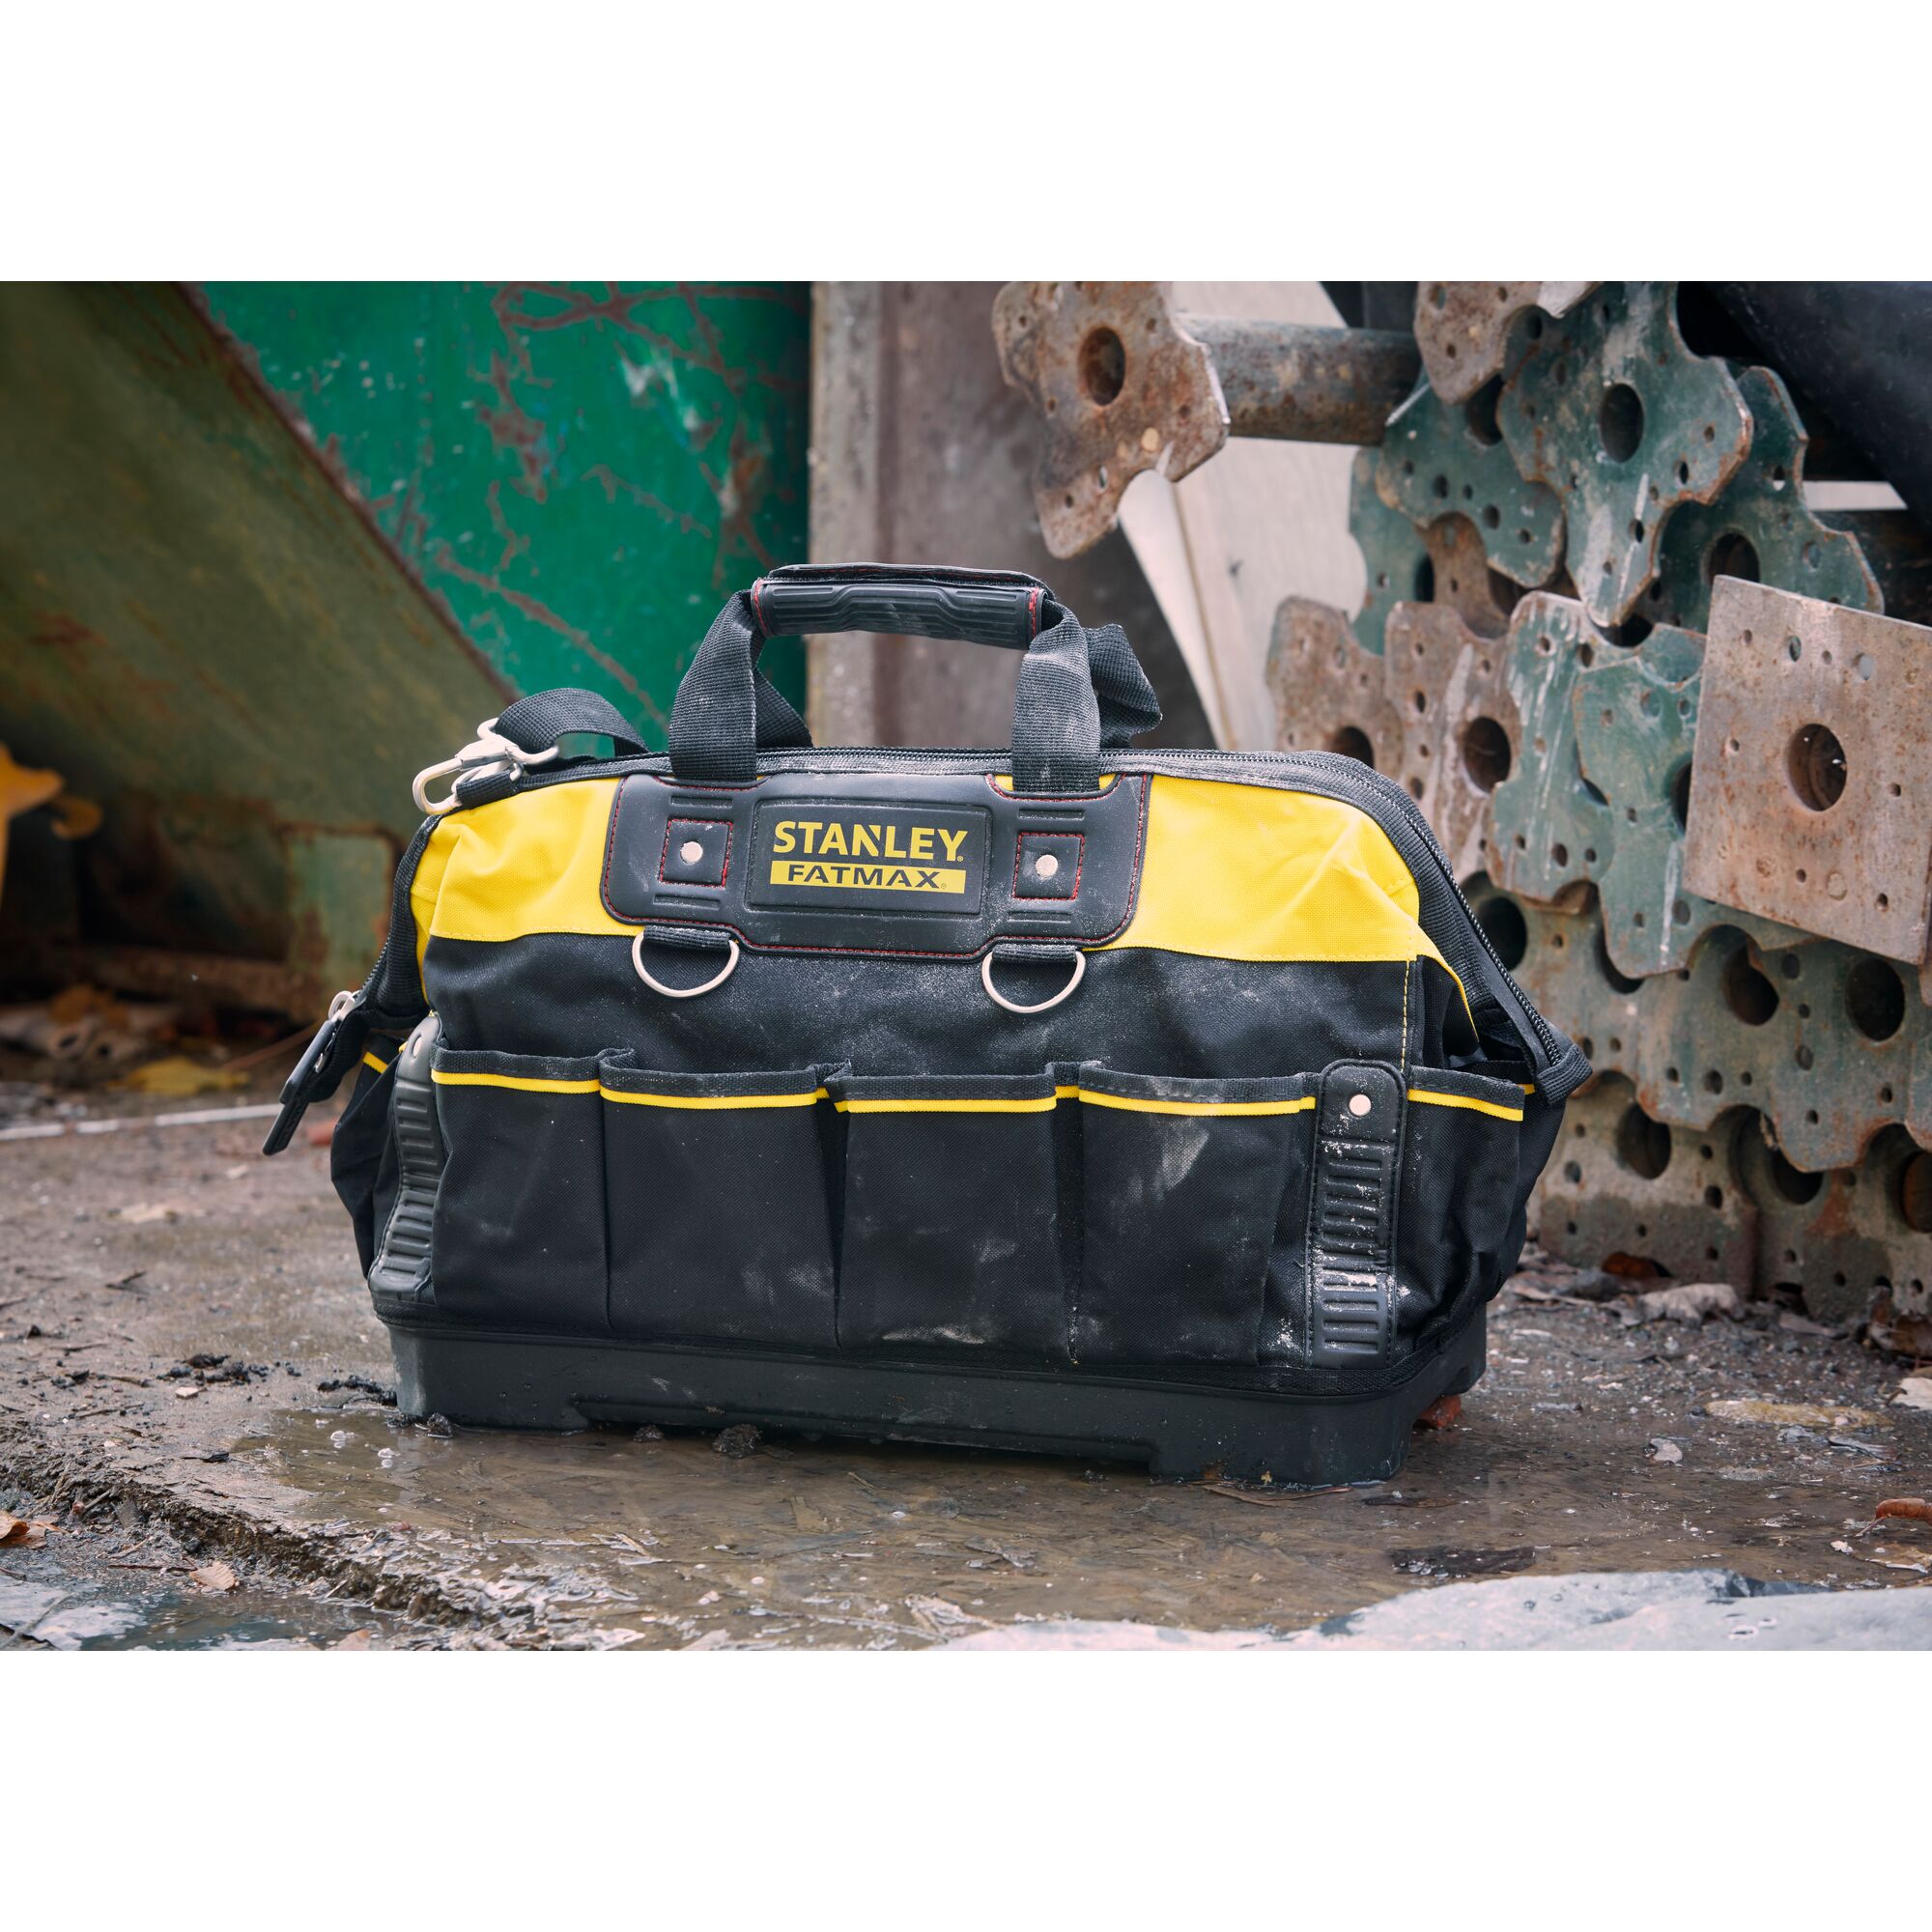 STANLEY 1-70-319 Open Tote Tool Bag, 20 inch : Amazon.in: Home Improvement